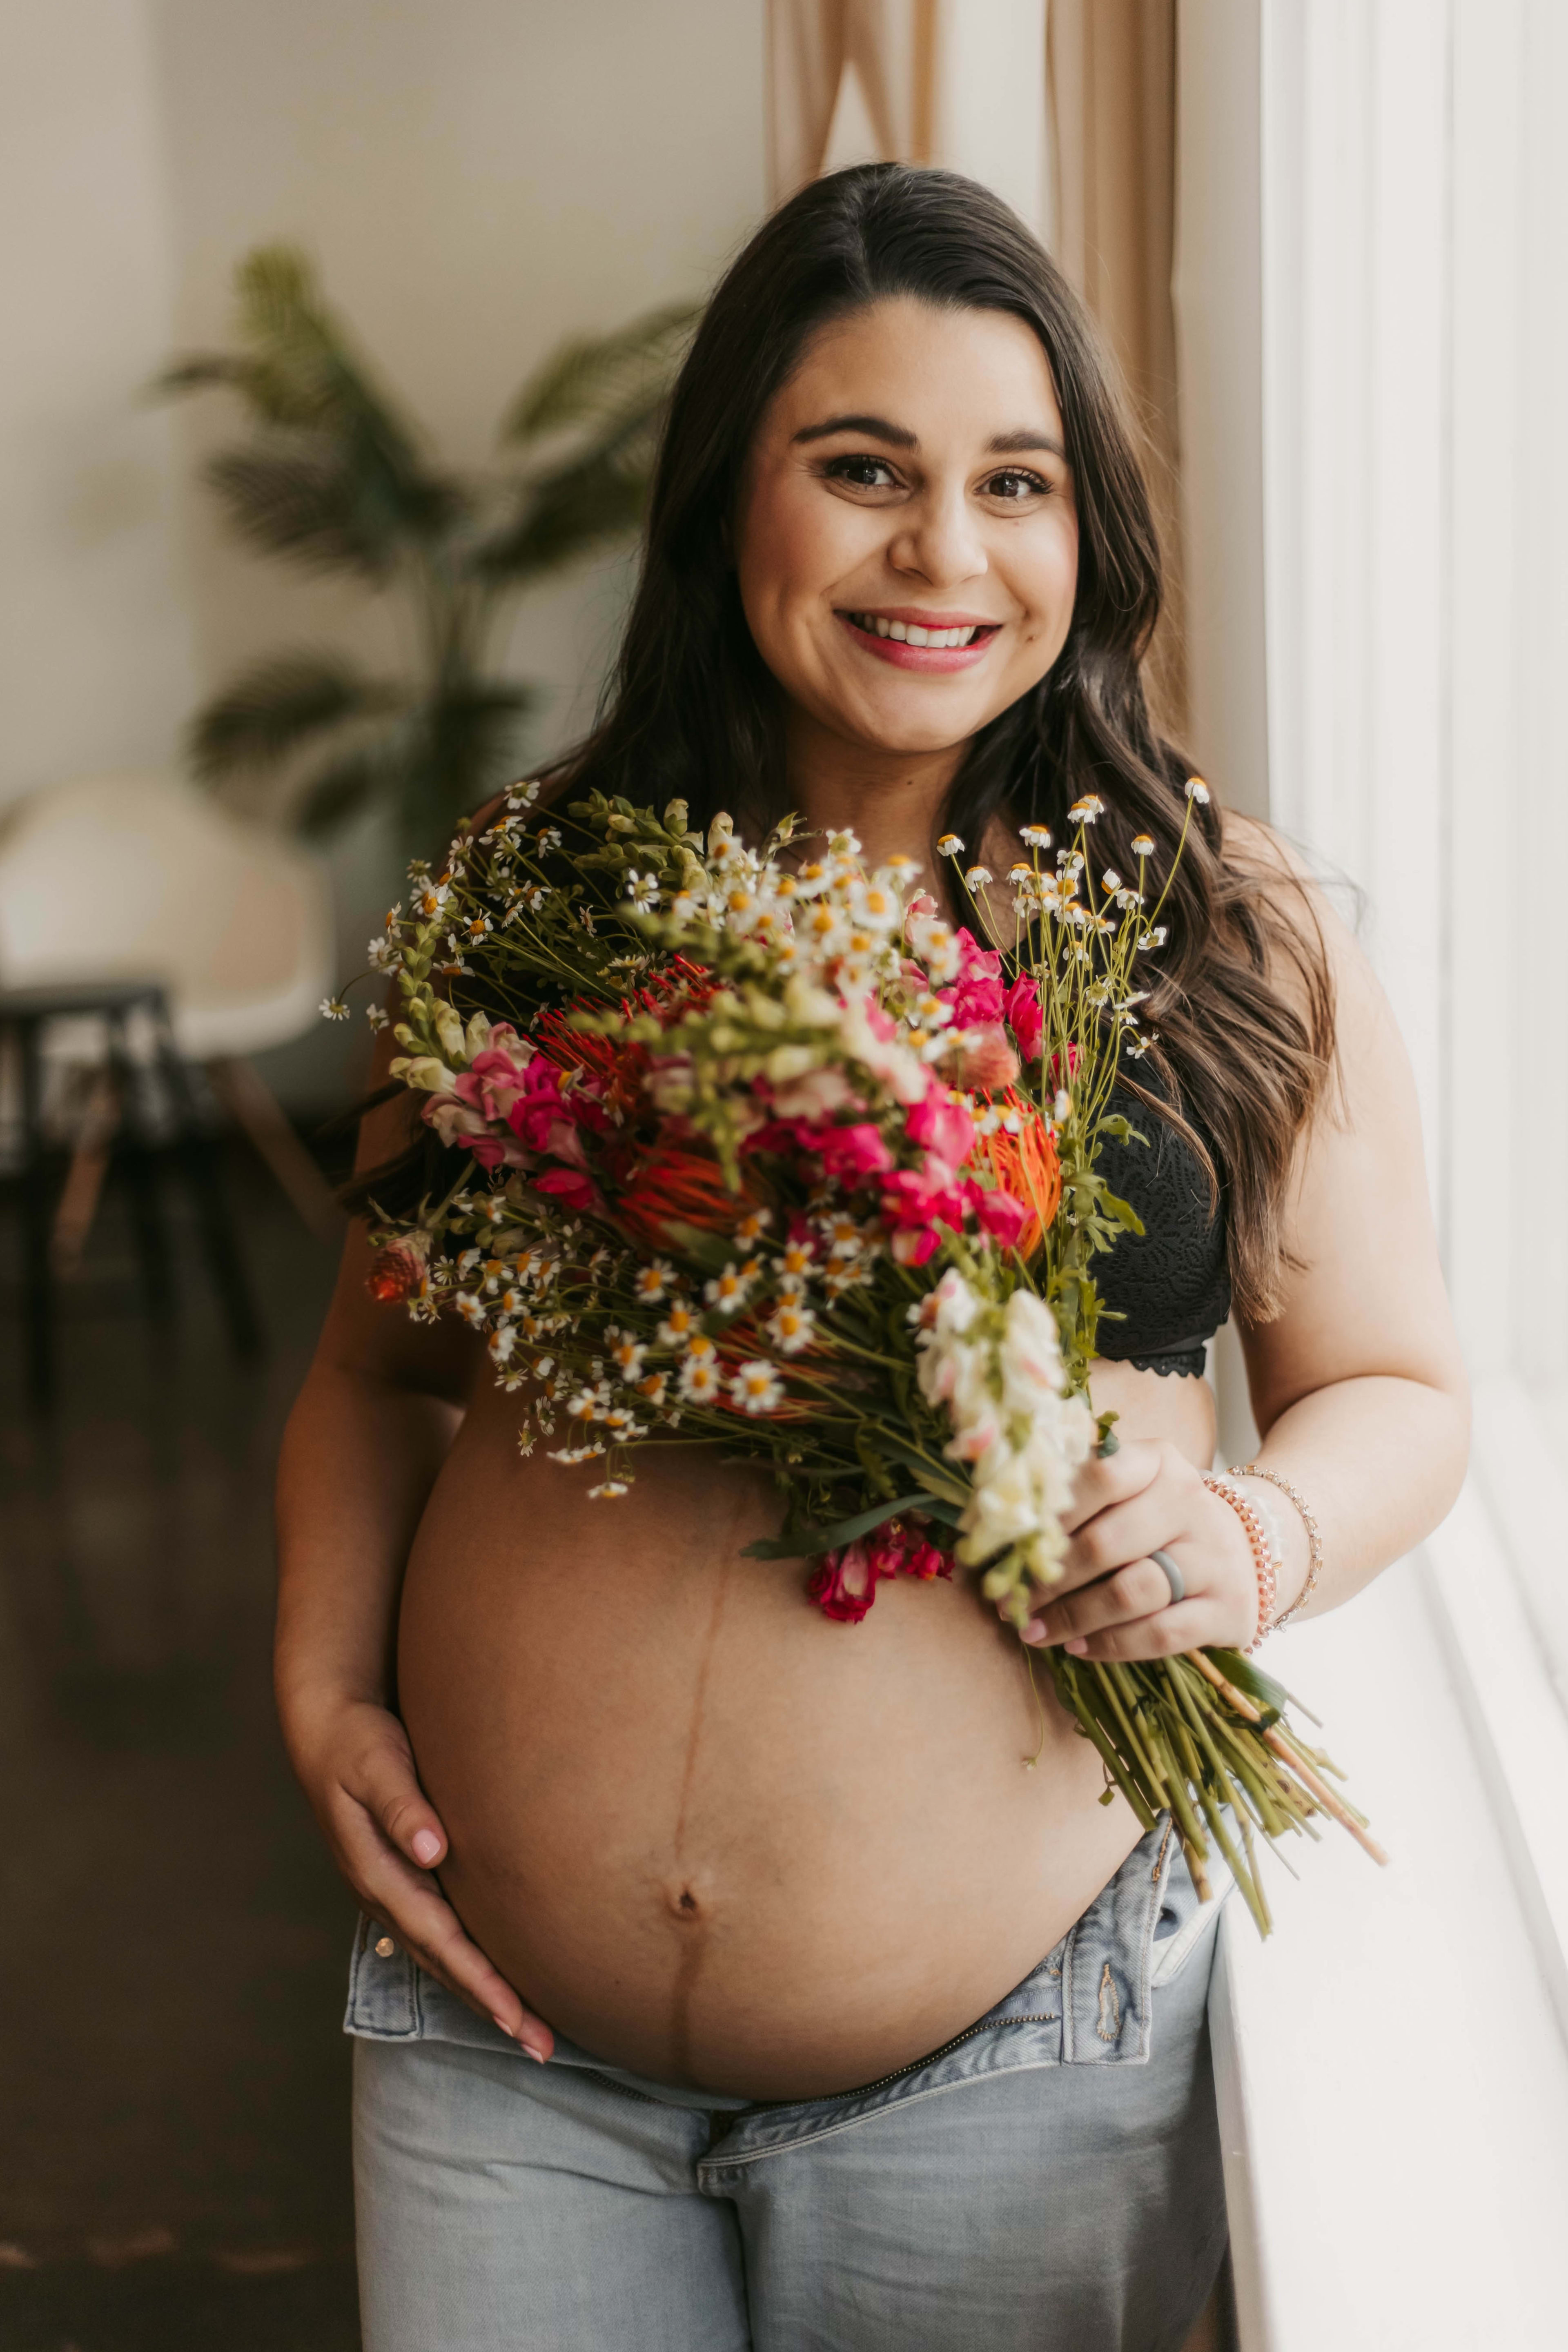 A pregnant woman in a photoshoot holding a bouquet of flowers.